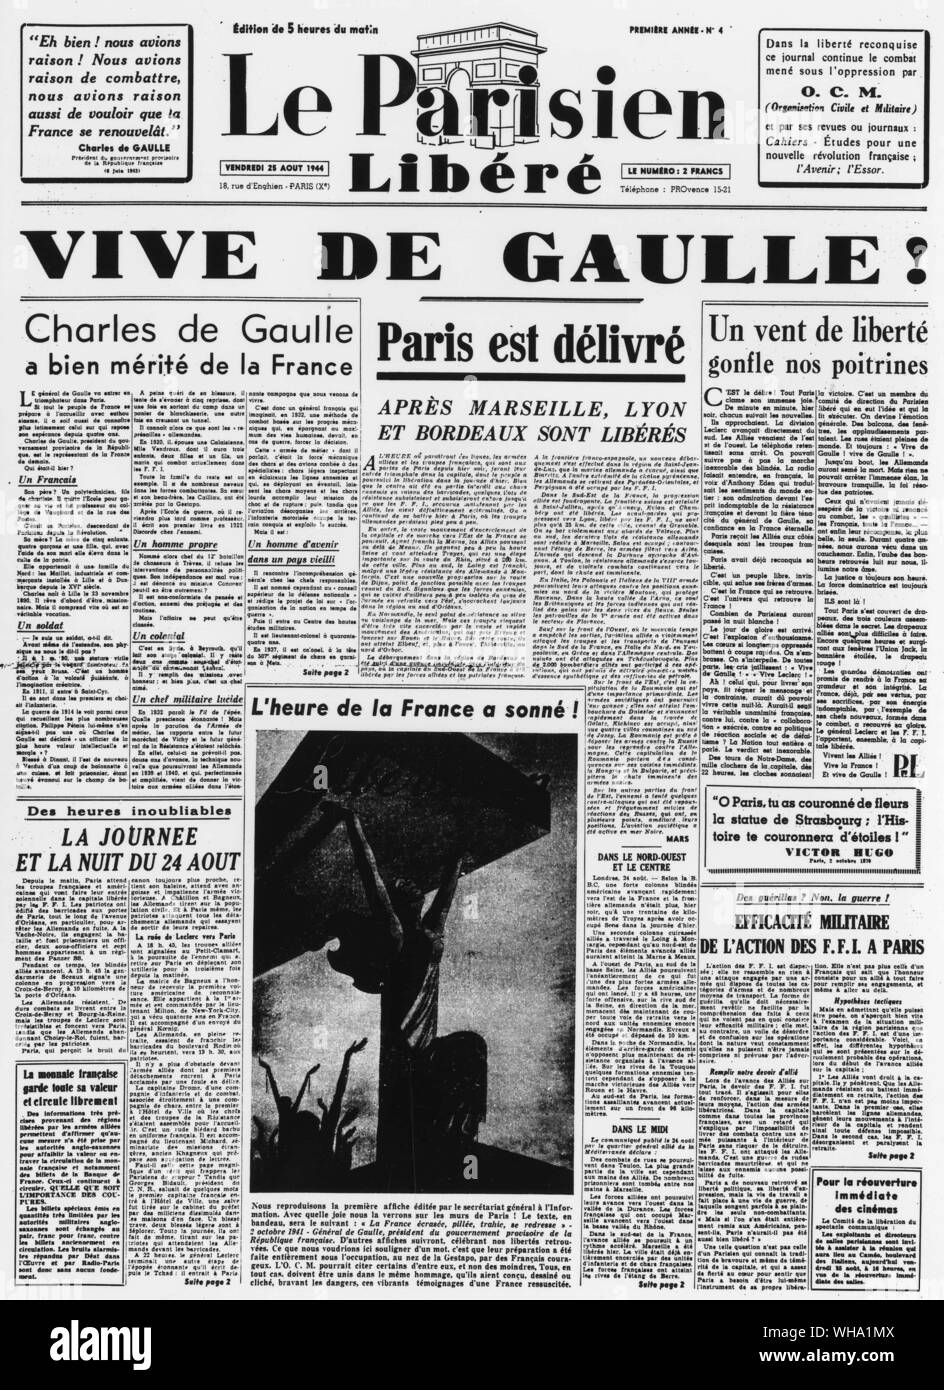 WW2: Liberation of Paris, 25th August 1944. Newspaper headline reads: Long Live Gaulle! Stock Photo